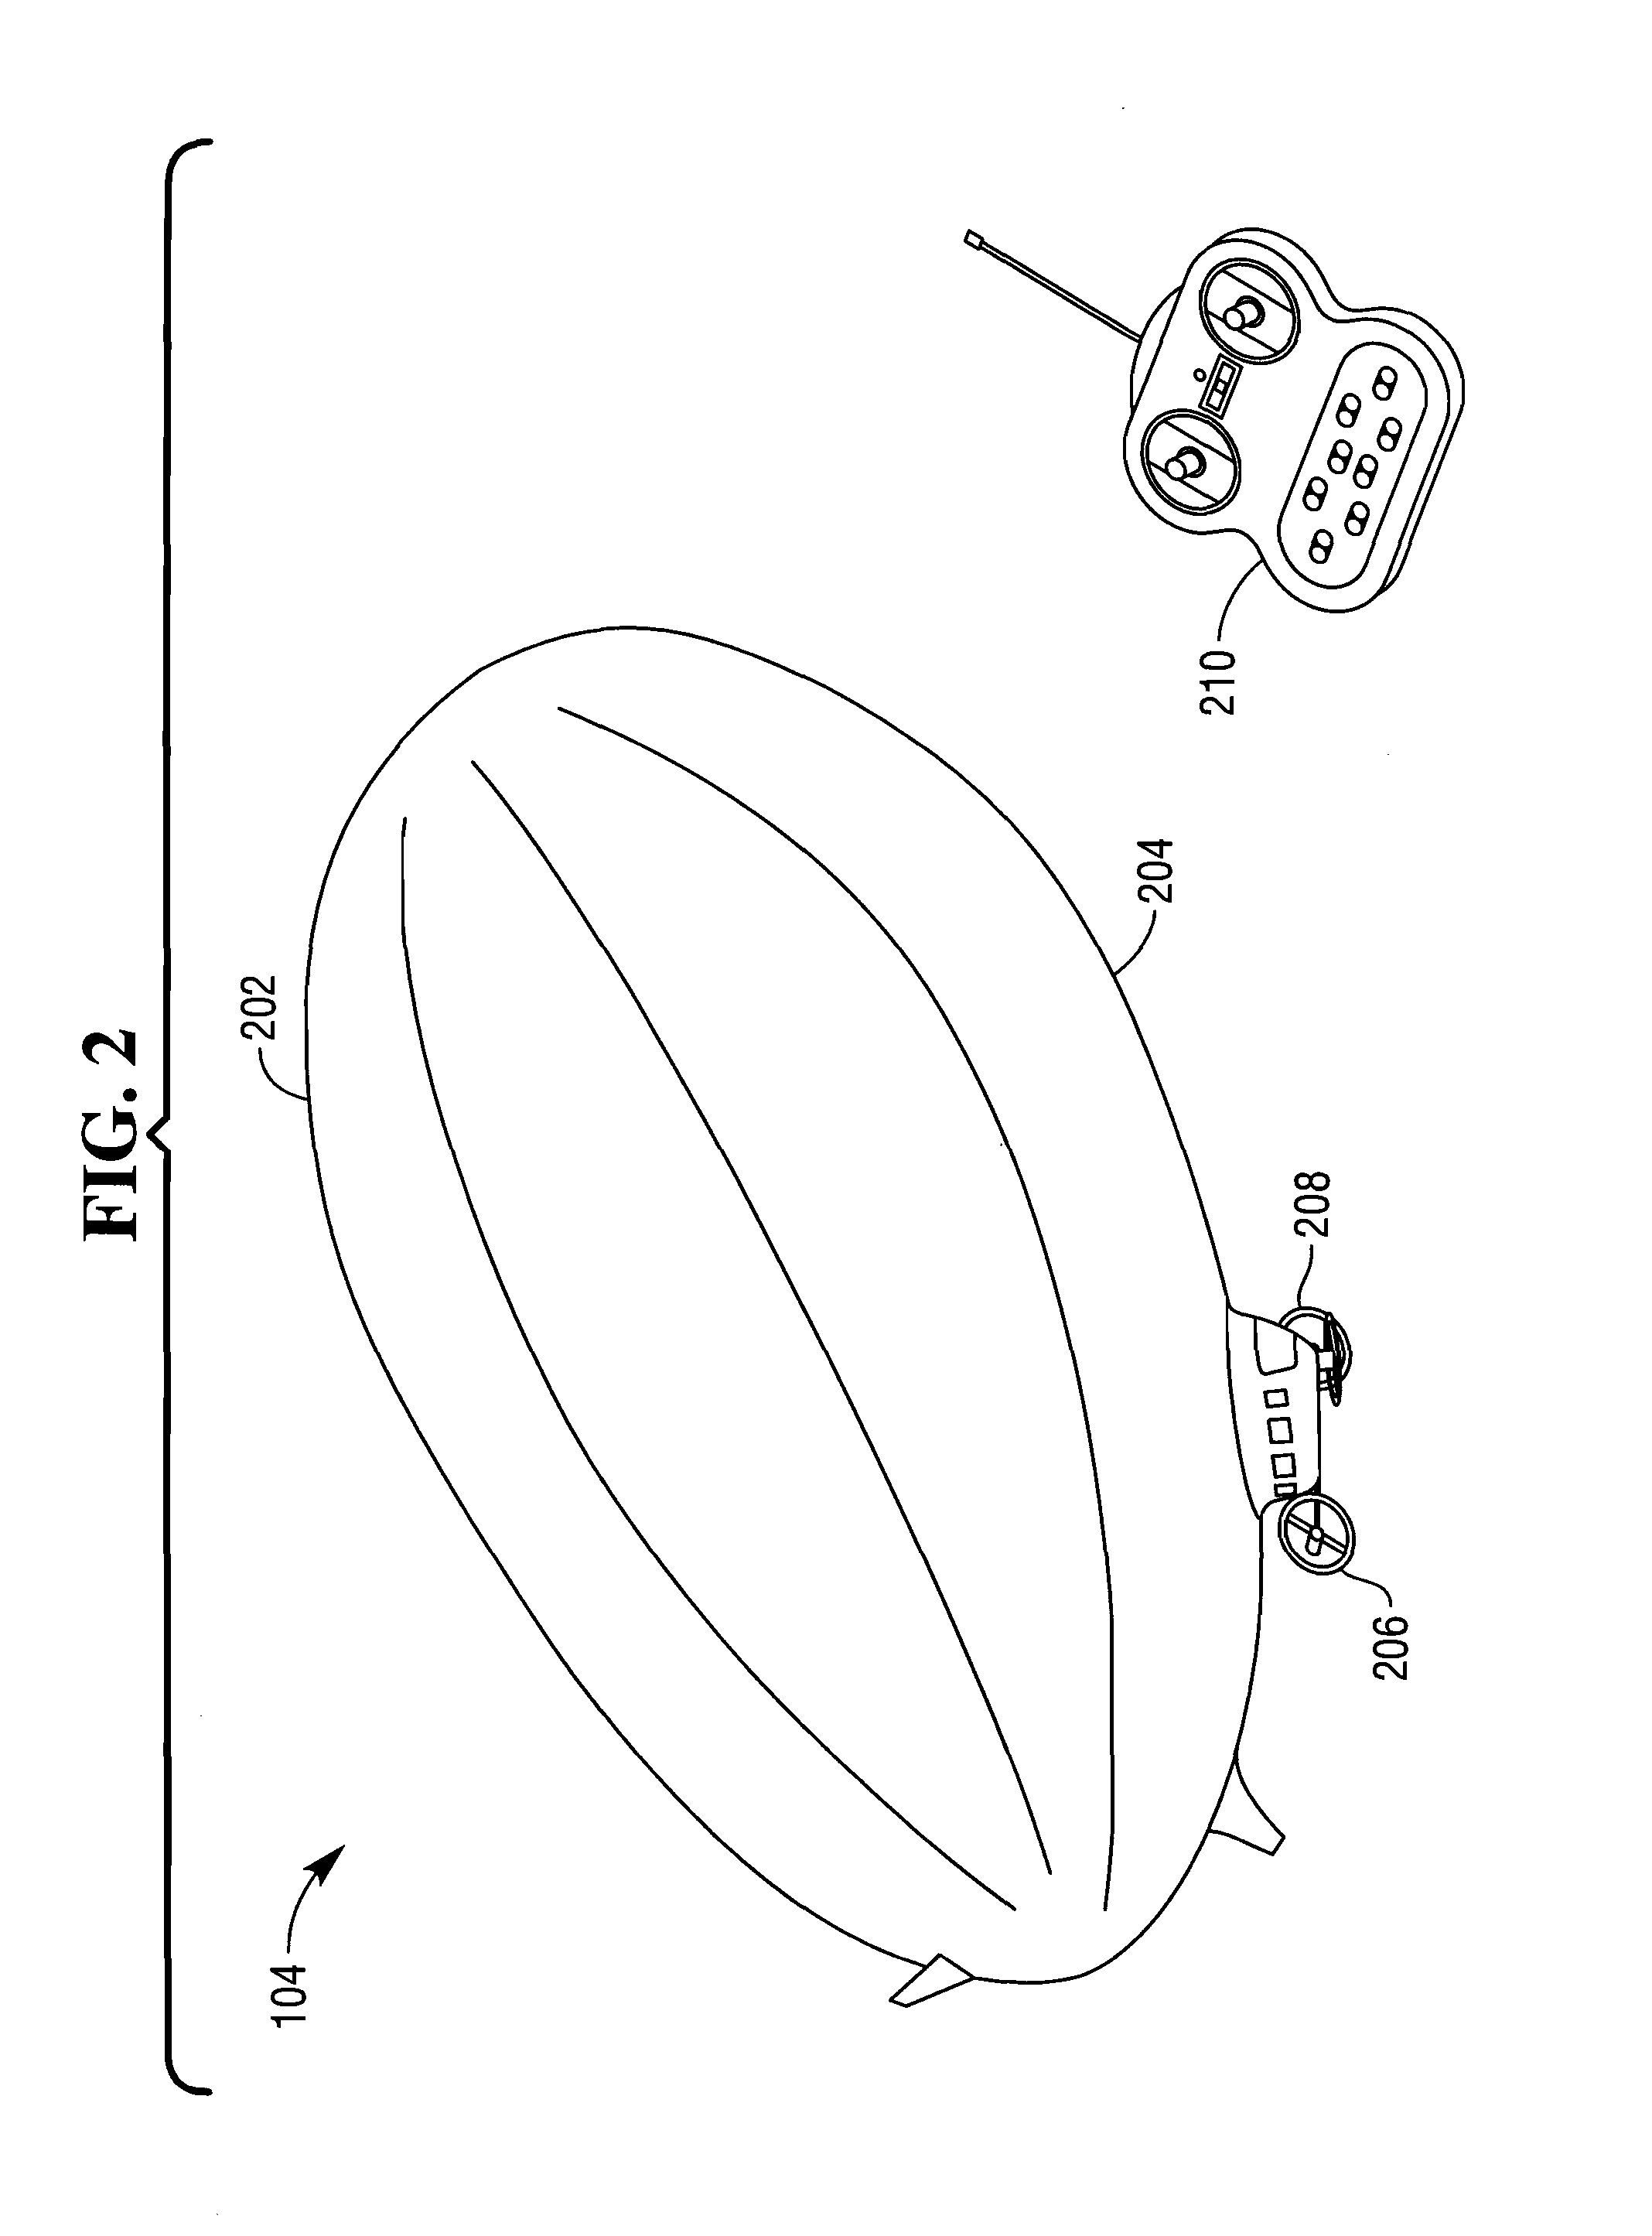 Methods and Apparatus for Inventory and Price Information Management